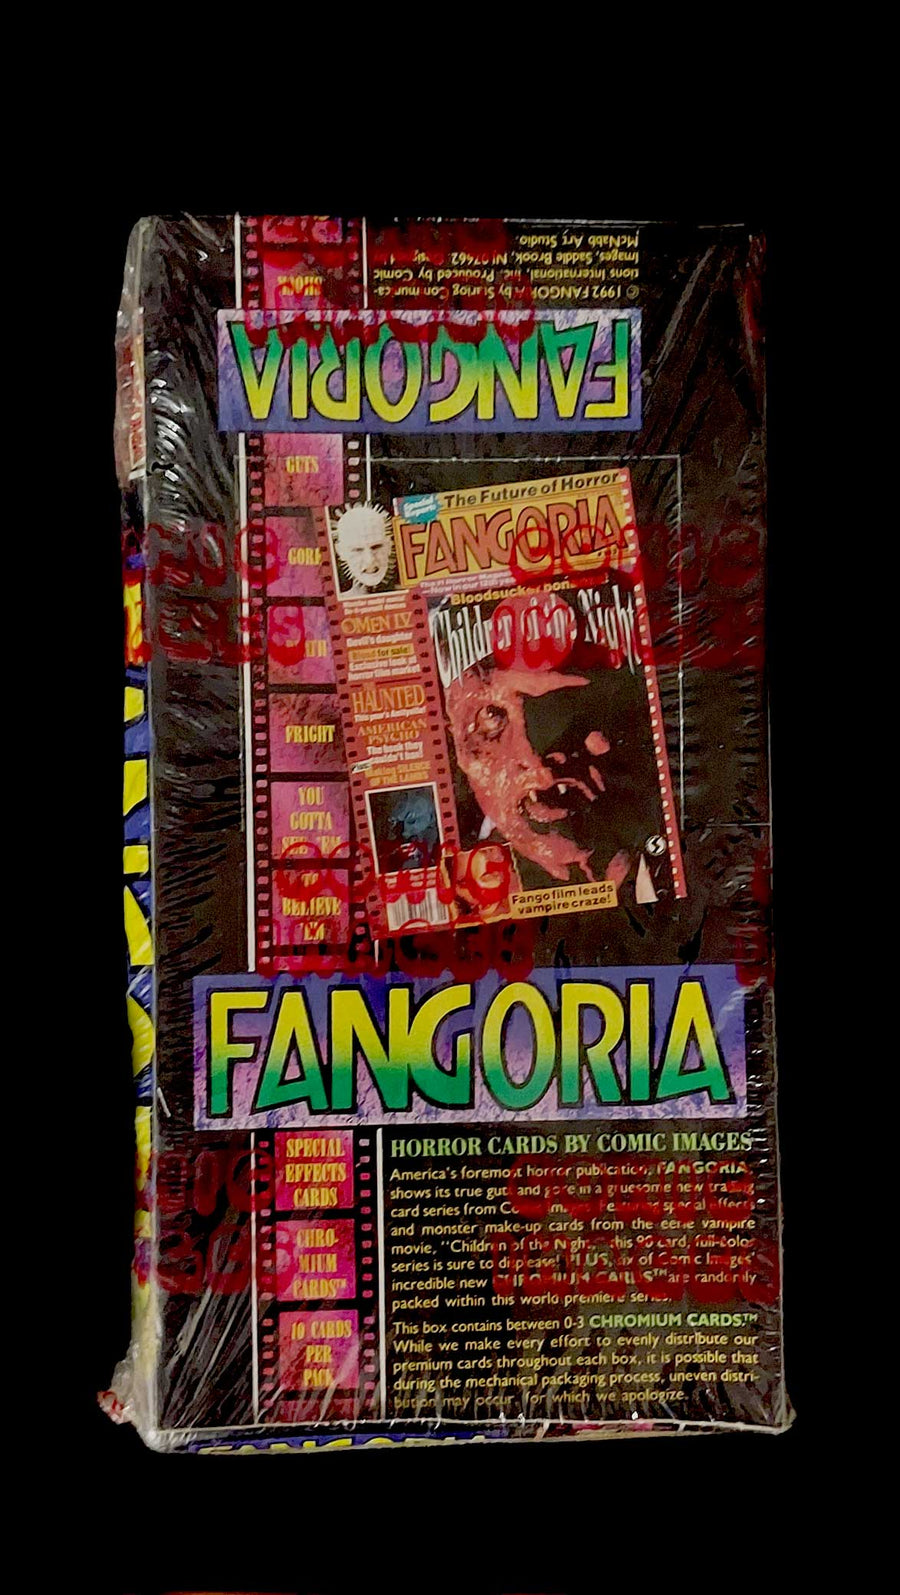 Fangoria-Horror-Cards-By-Comic-Images